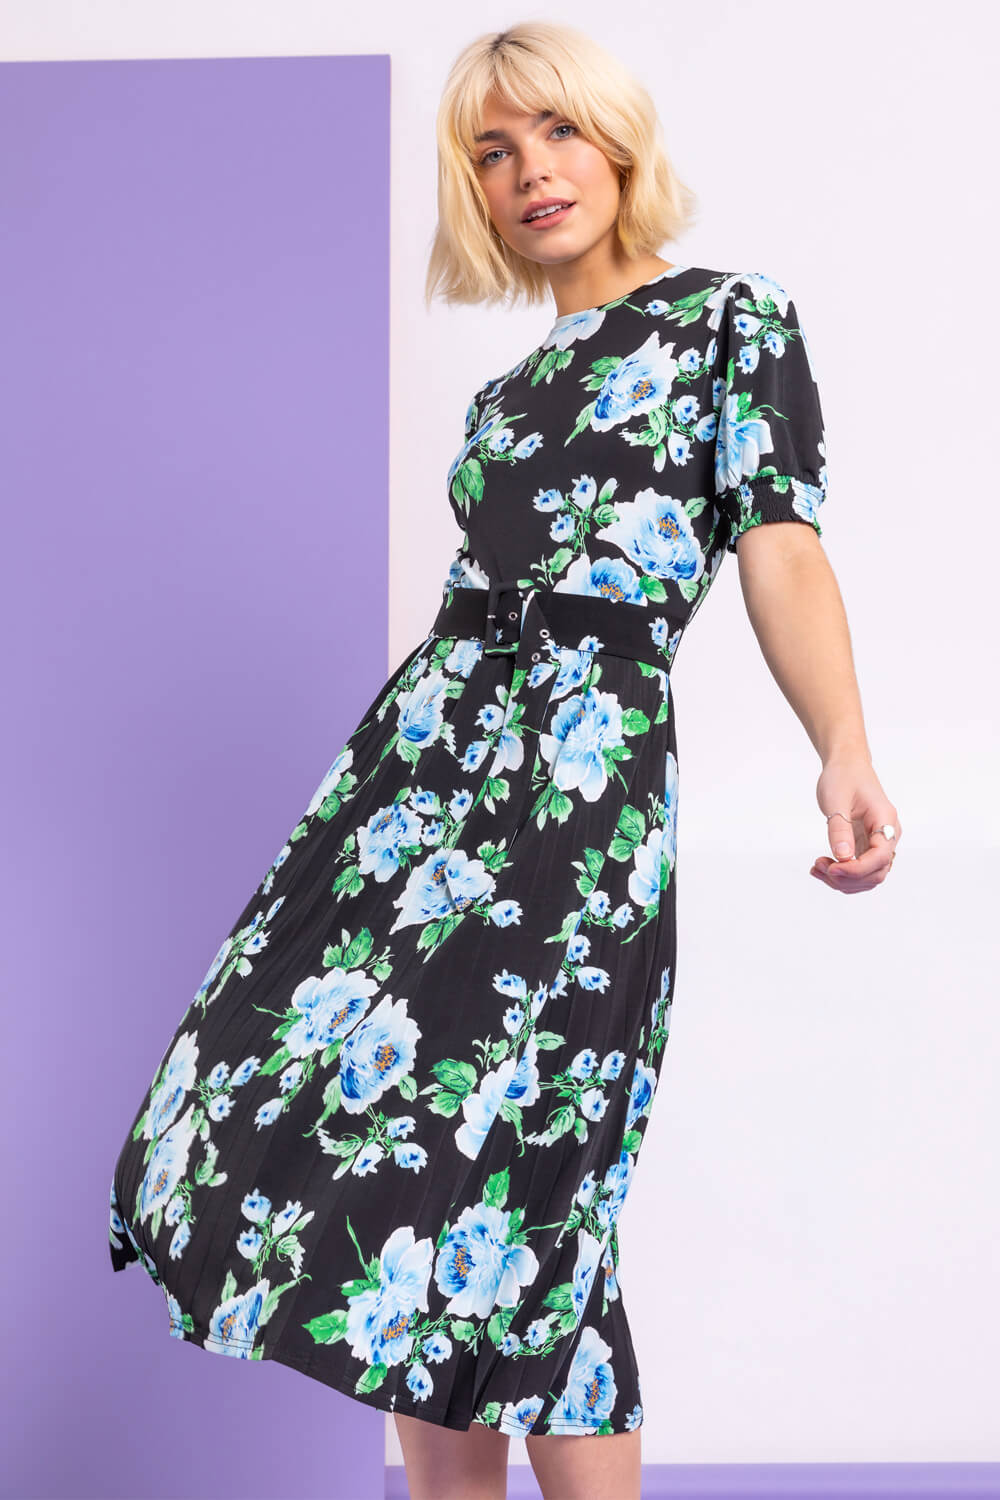 Black Floral Pleated Fit & Flare Dress, Image 5 of 5